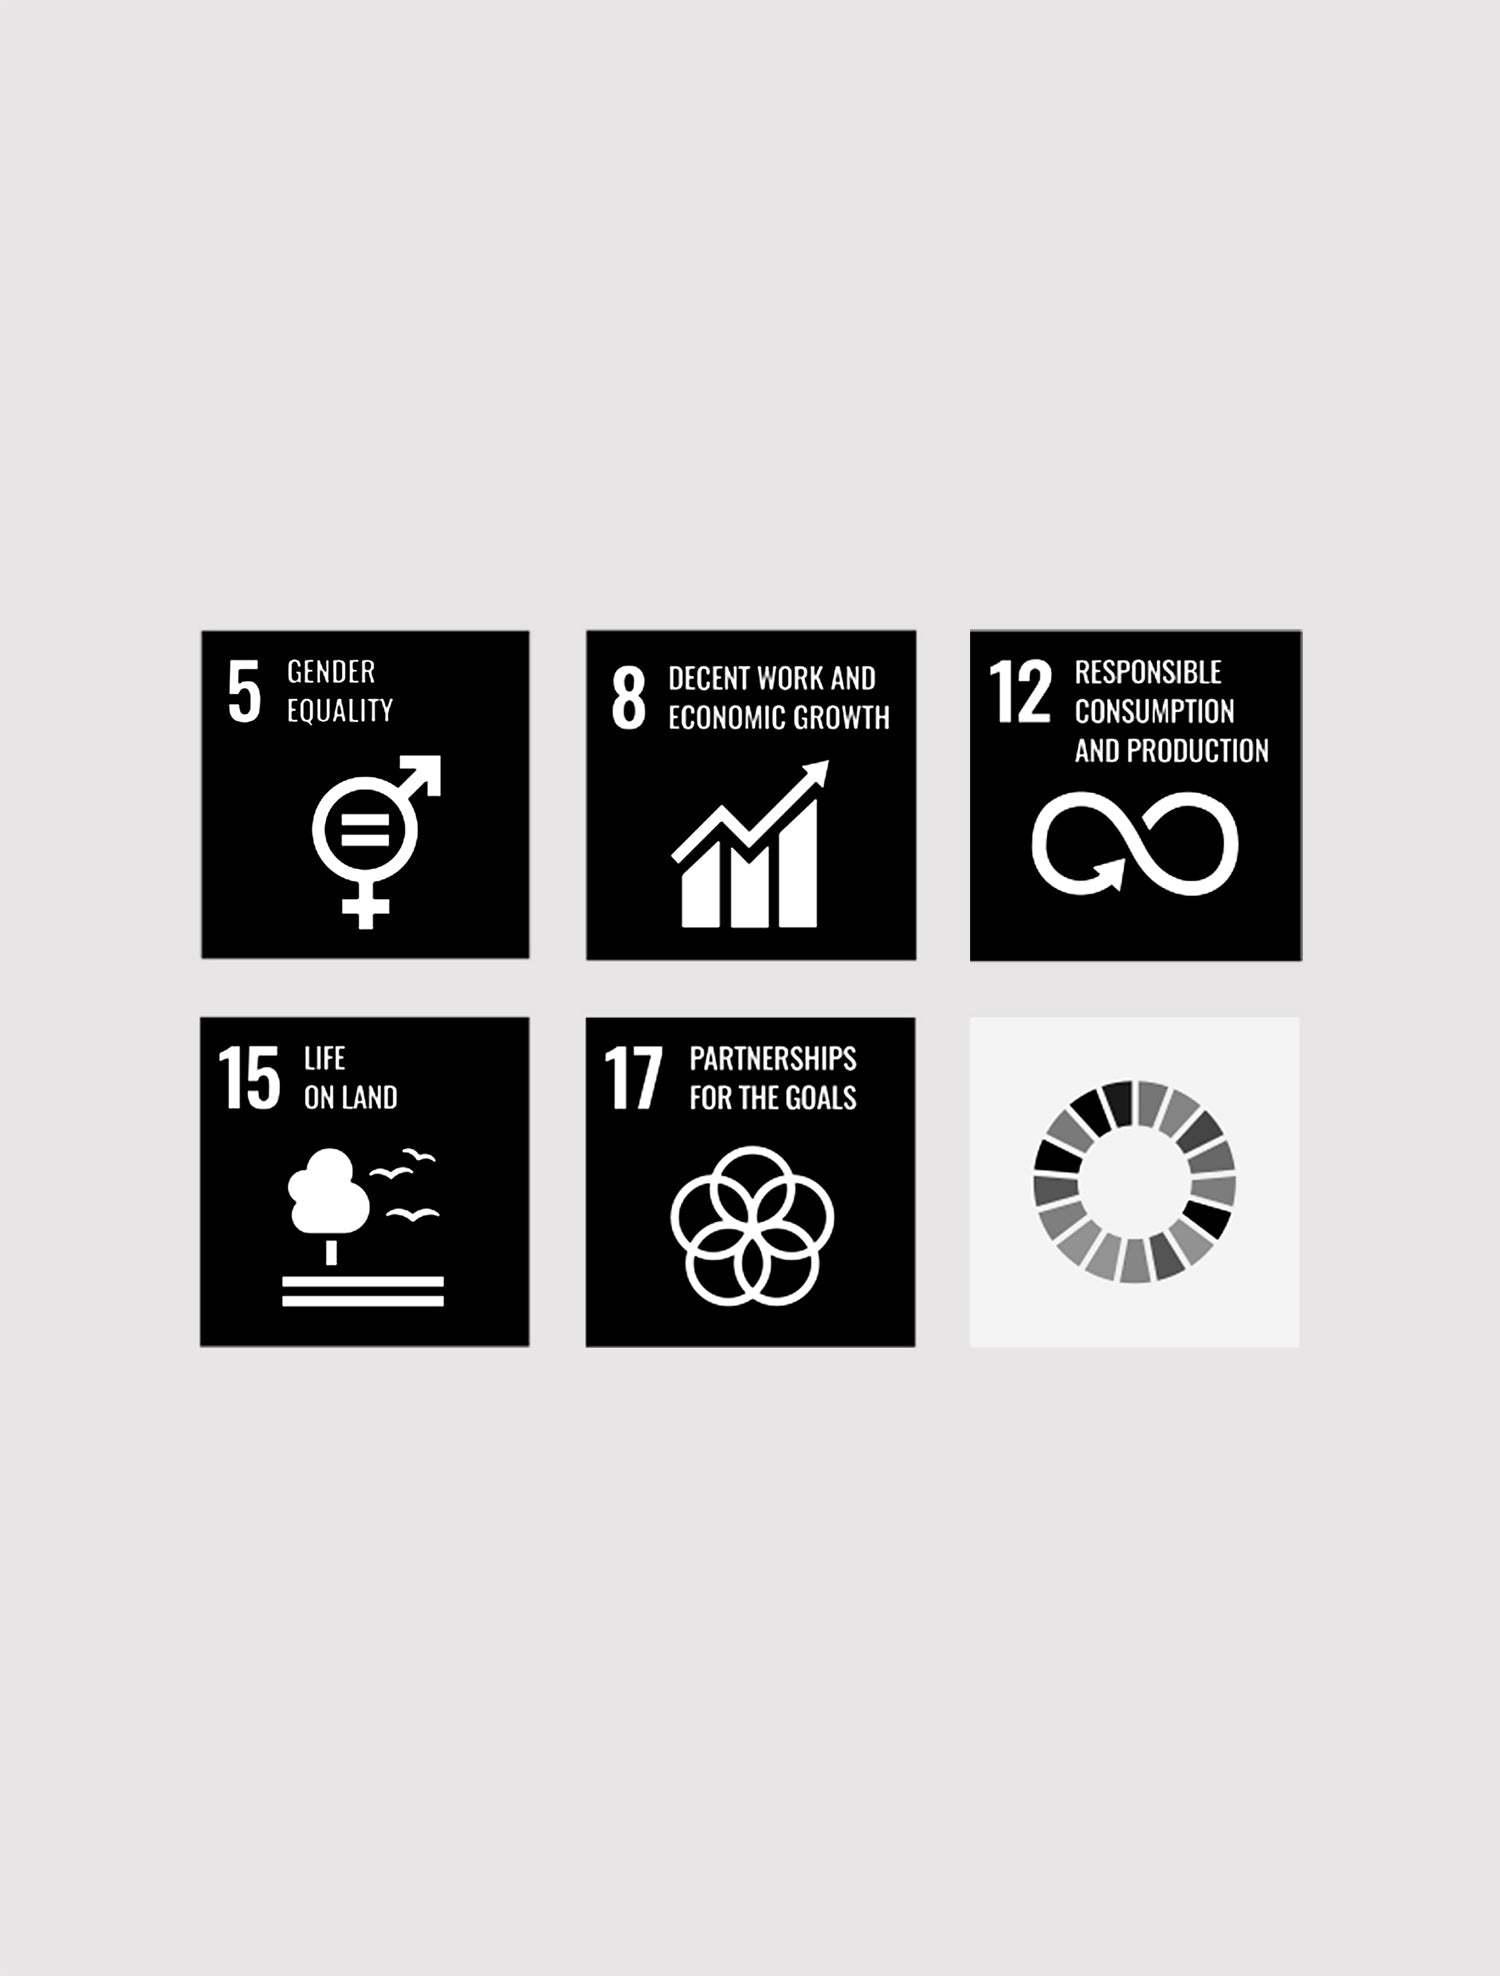 Our commitment to the Sustainable Development Goals